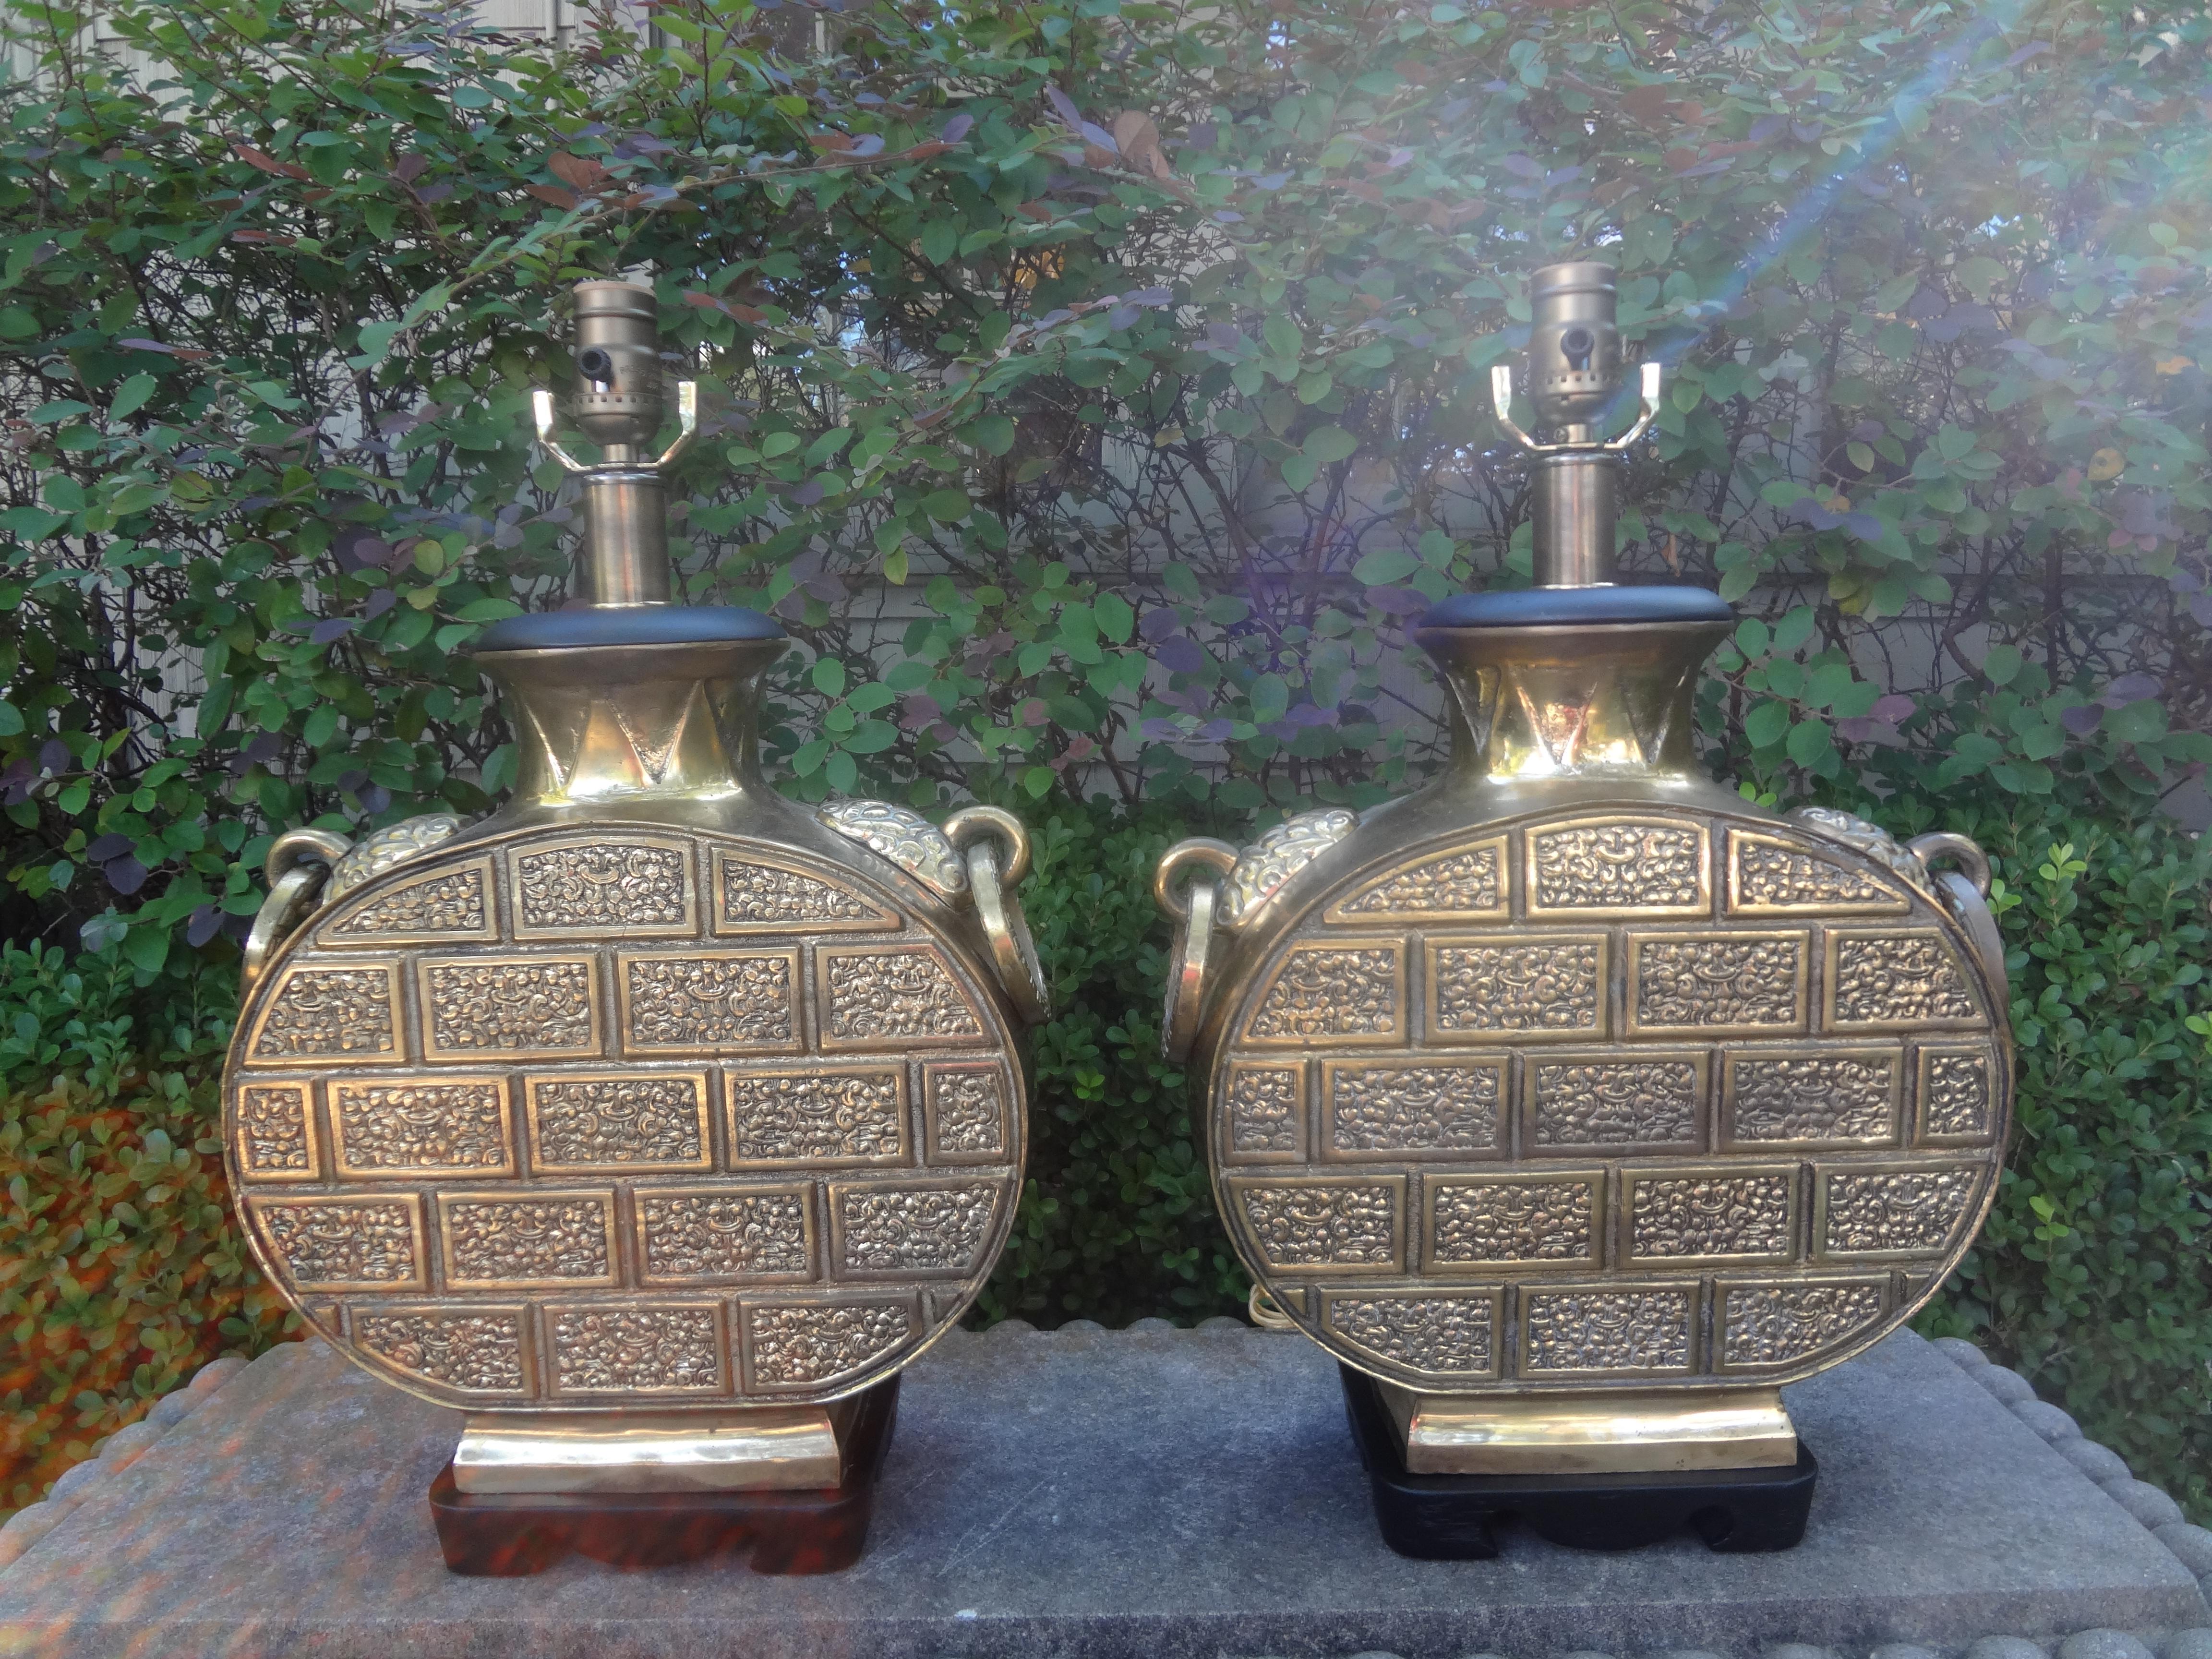 Pair of Chinese Modern Brass Lamps.
A great pair of well detailed Chinese modern or Asian modern brass table lamps This versatile pair of lamps have been newly wired with new sockets and would work well in a variety of interiors.
Great patina!